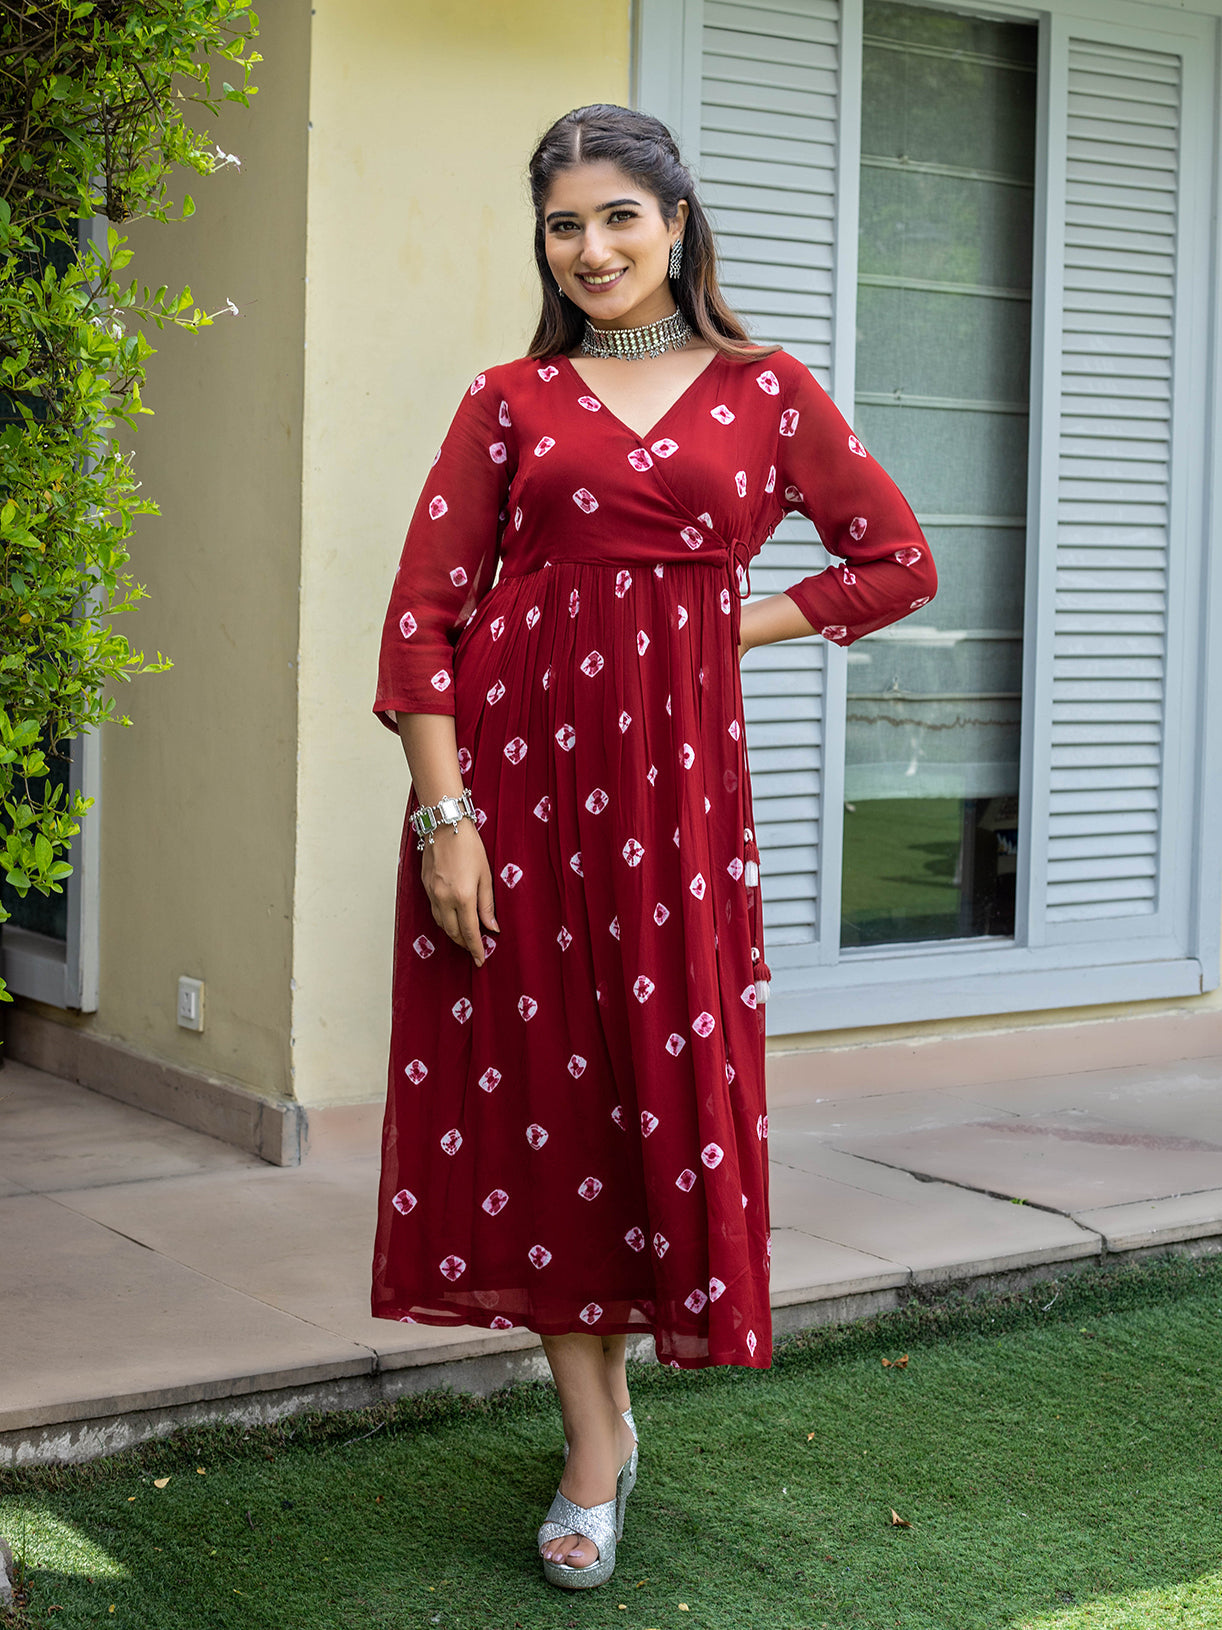 embrace-tradition-with-our-maroon-angrakha-anarkali-dress-the-mesmerizing-bandhani-print-adds-a-touch-of-classic-elegance